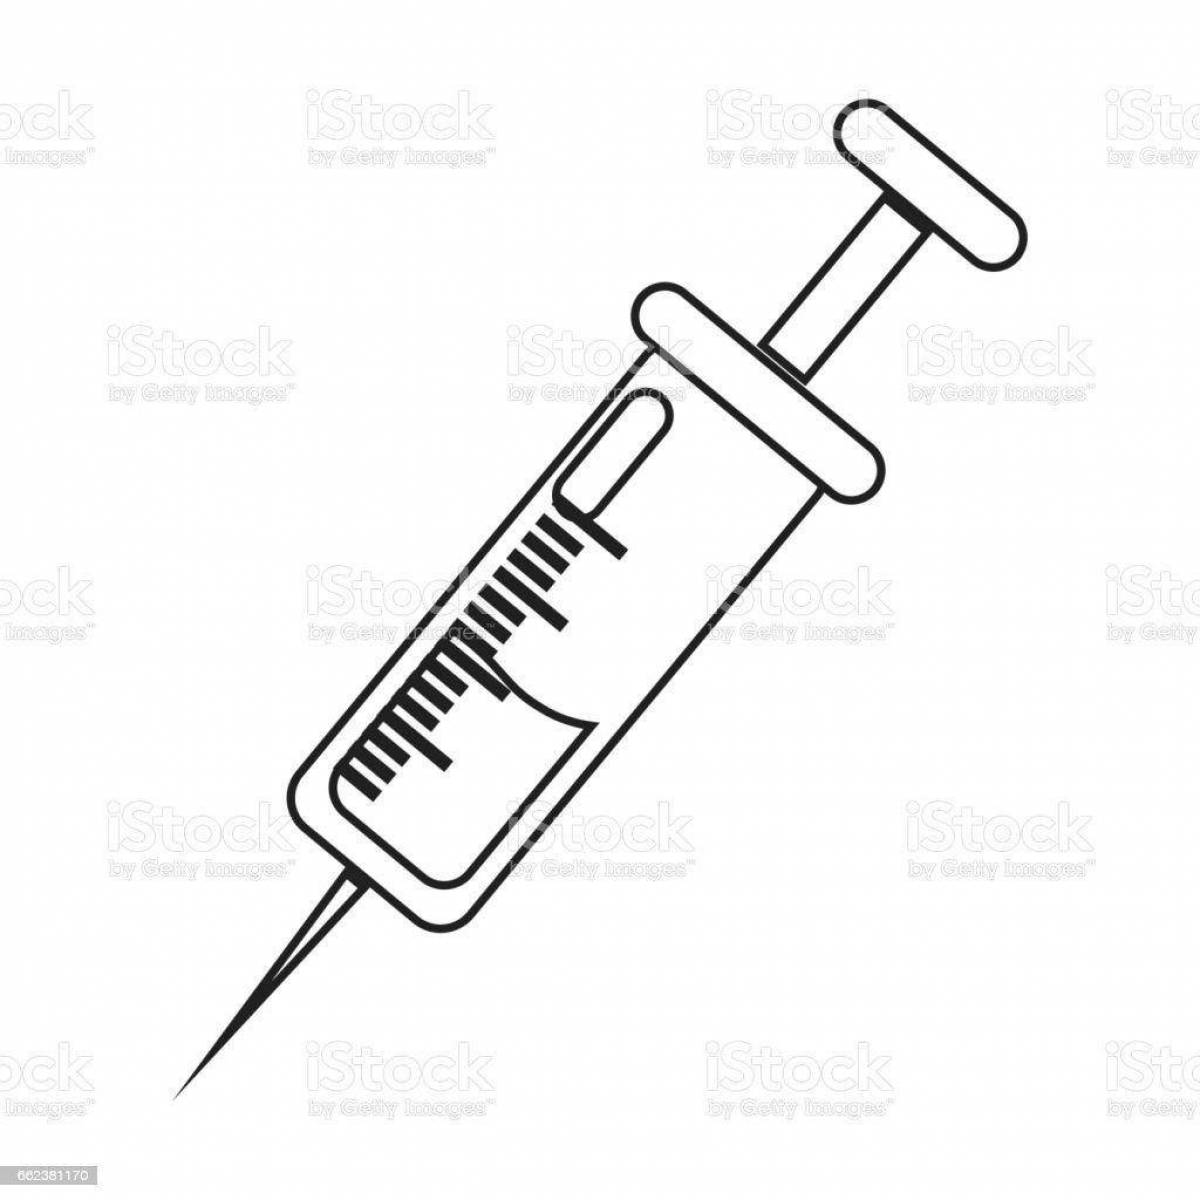 Coloring page cute syringe with needle